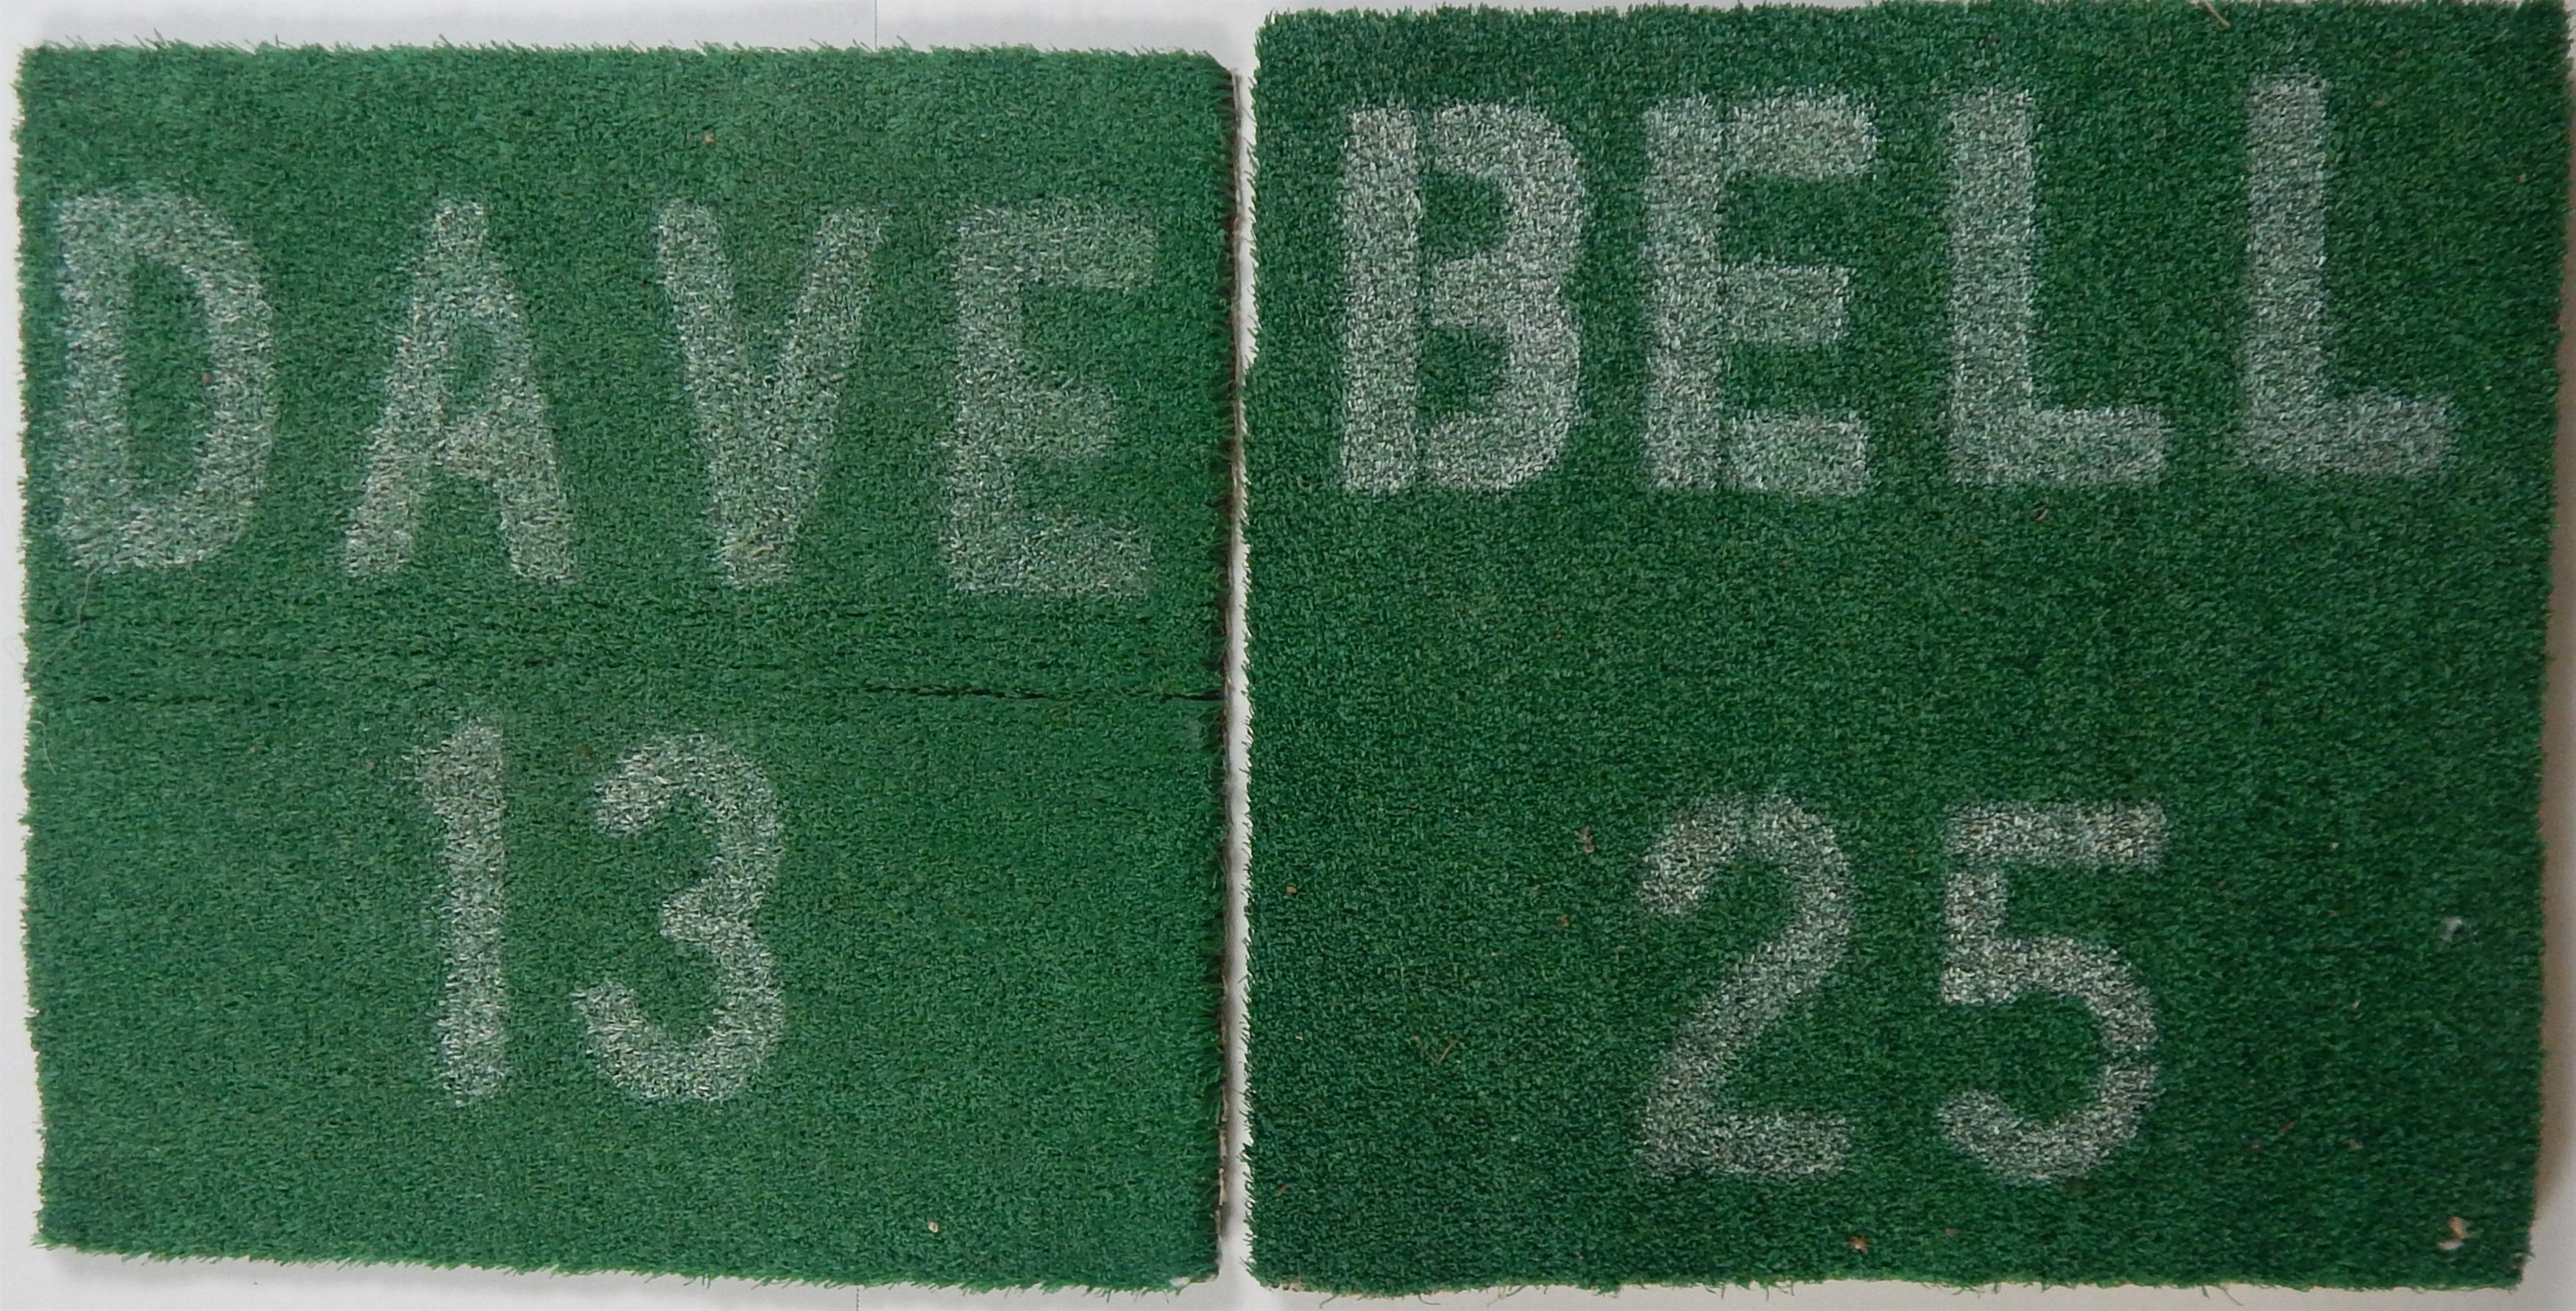 - Riverfront Stadium Turf Used in Reds Locker Room From the Bernie Stowe Collection